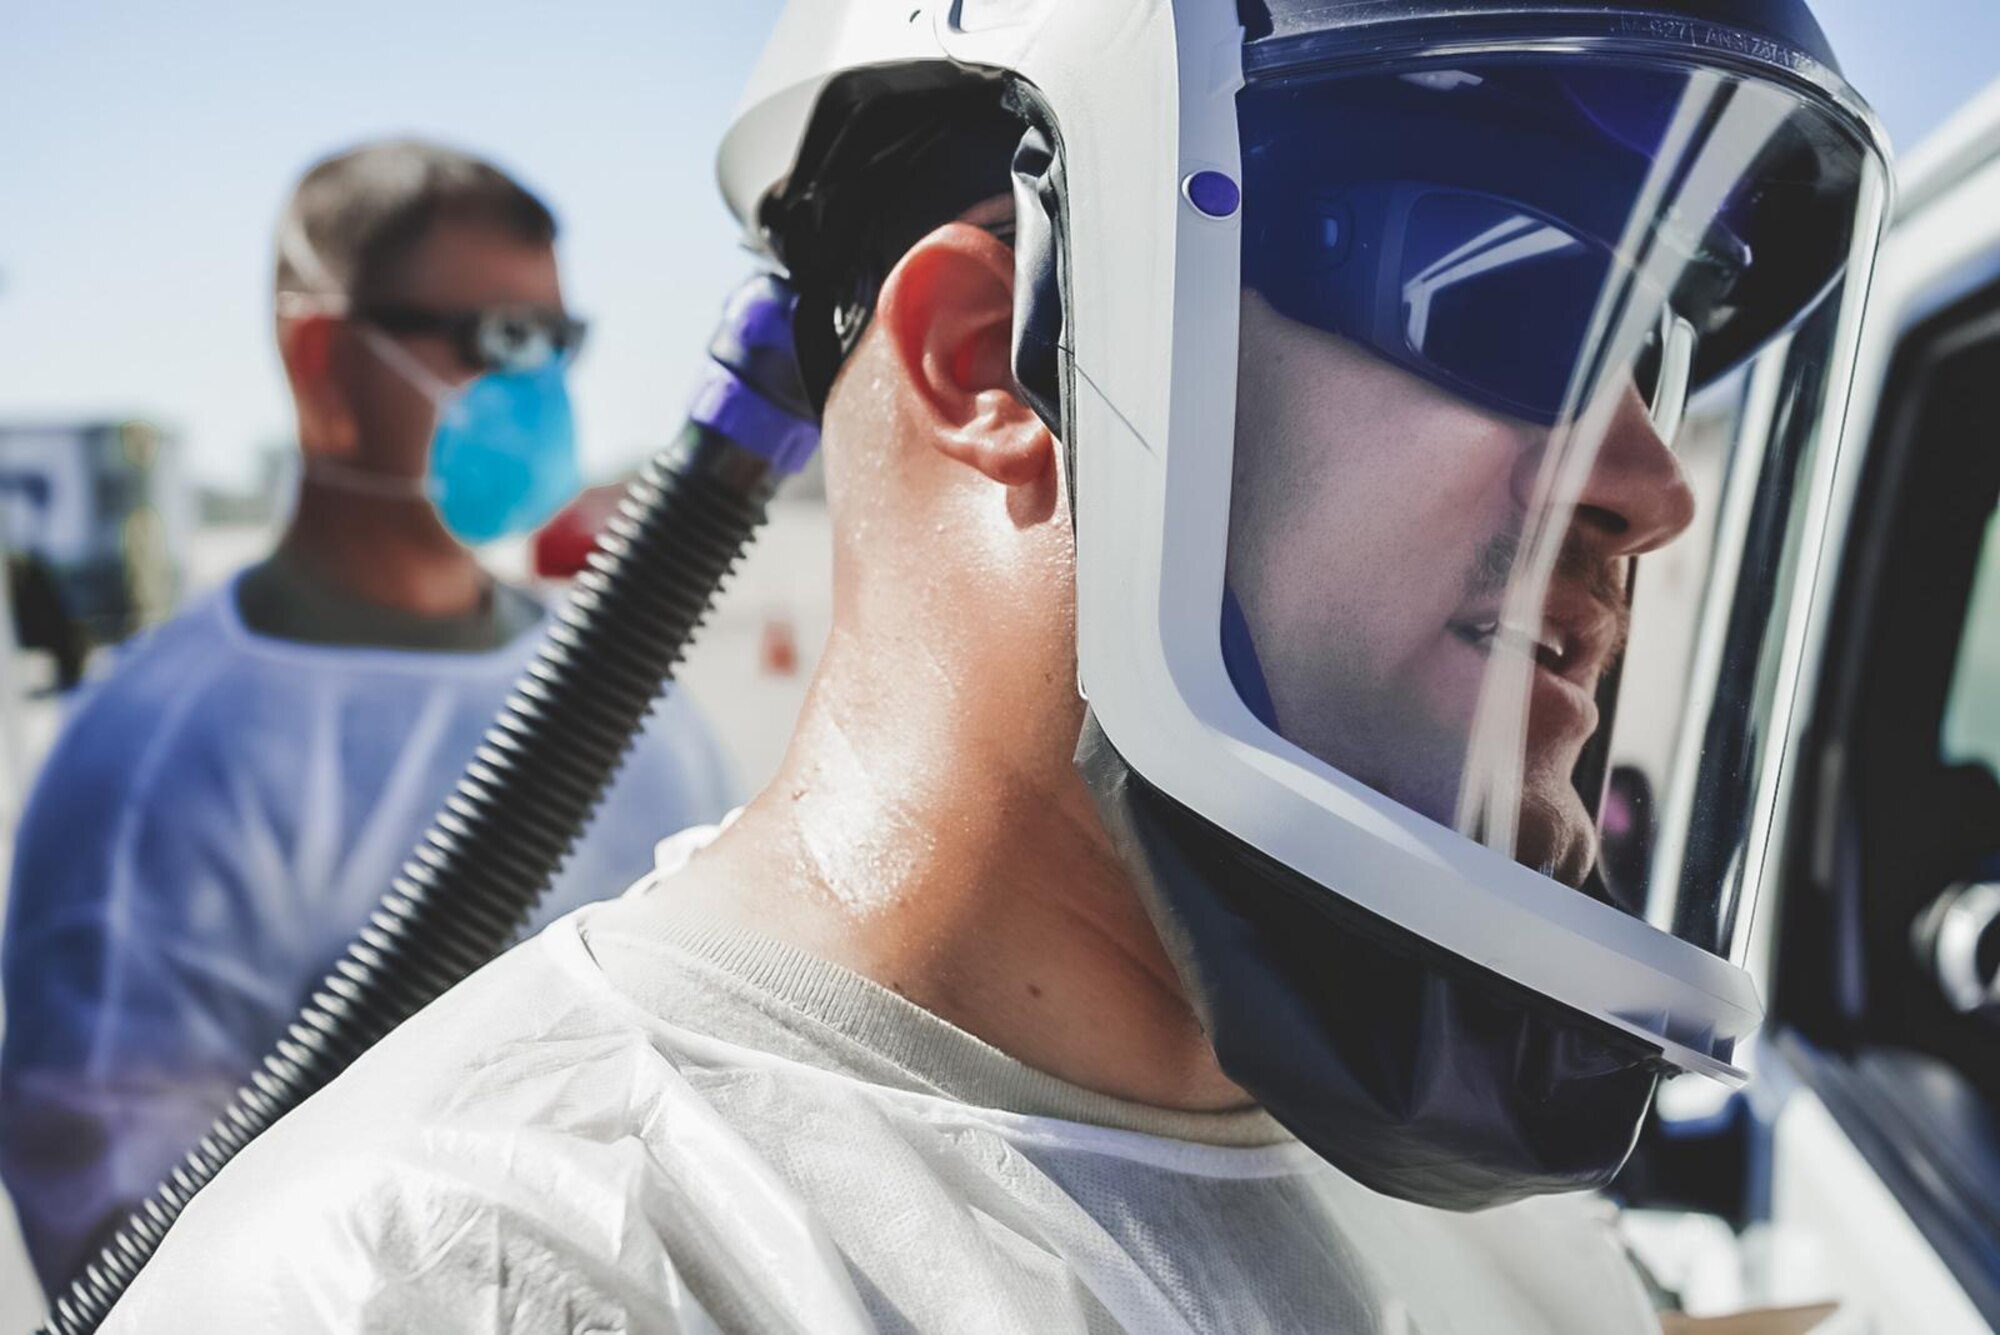 U.S. Air Force Capt. Patrick McGar, 144th Fighter Wing clinical nurse, administers a COVID-19 test at a drive-thru testing site in Indio, Calif.